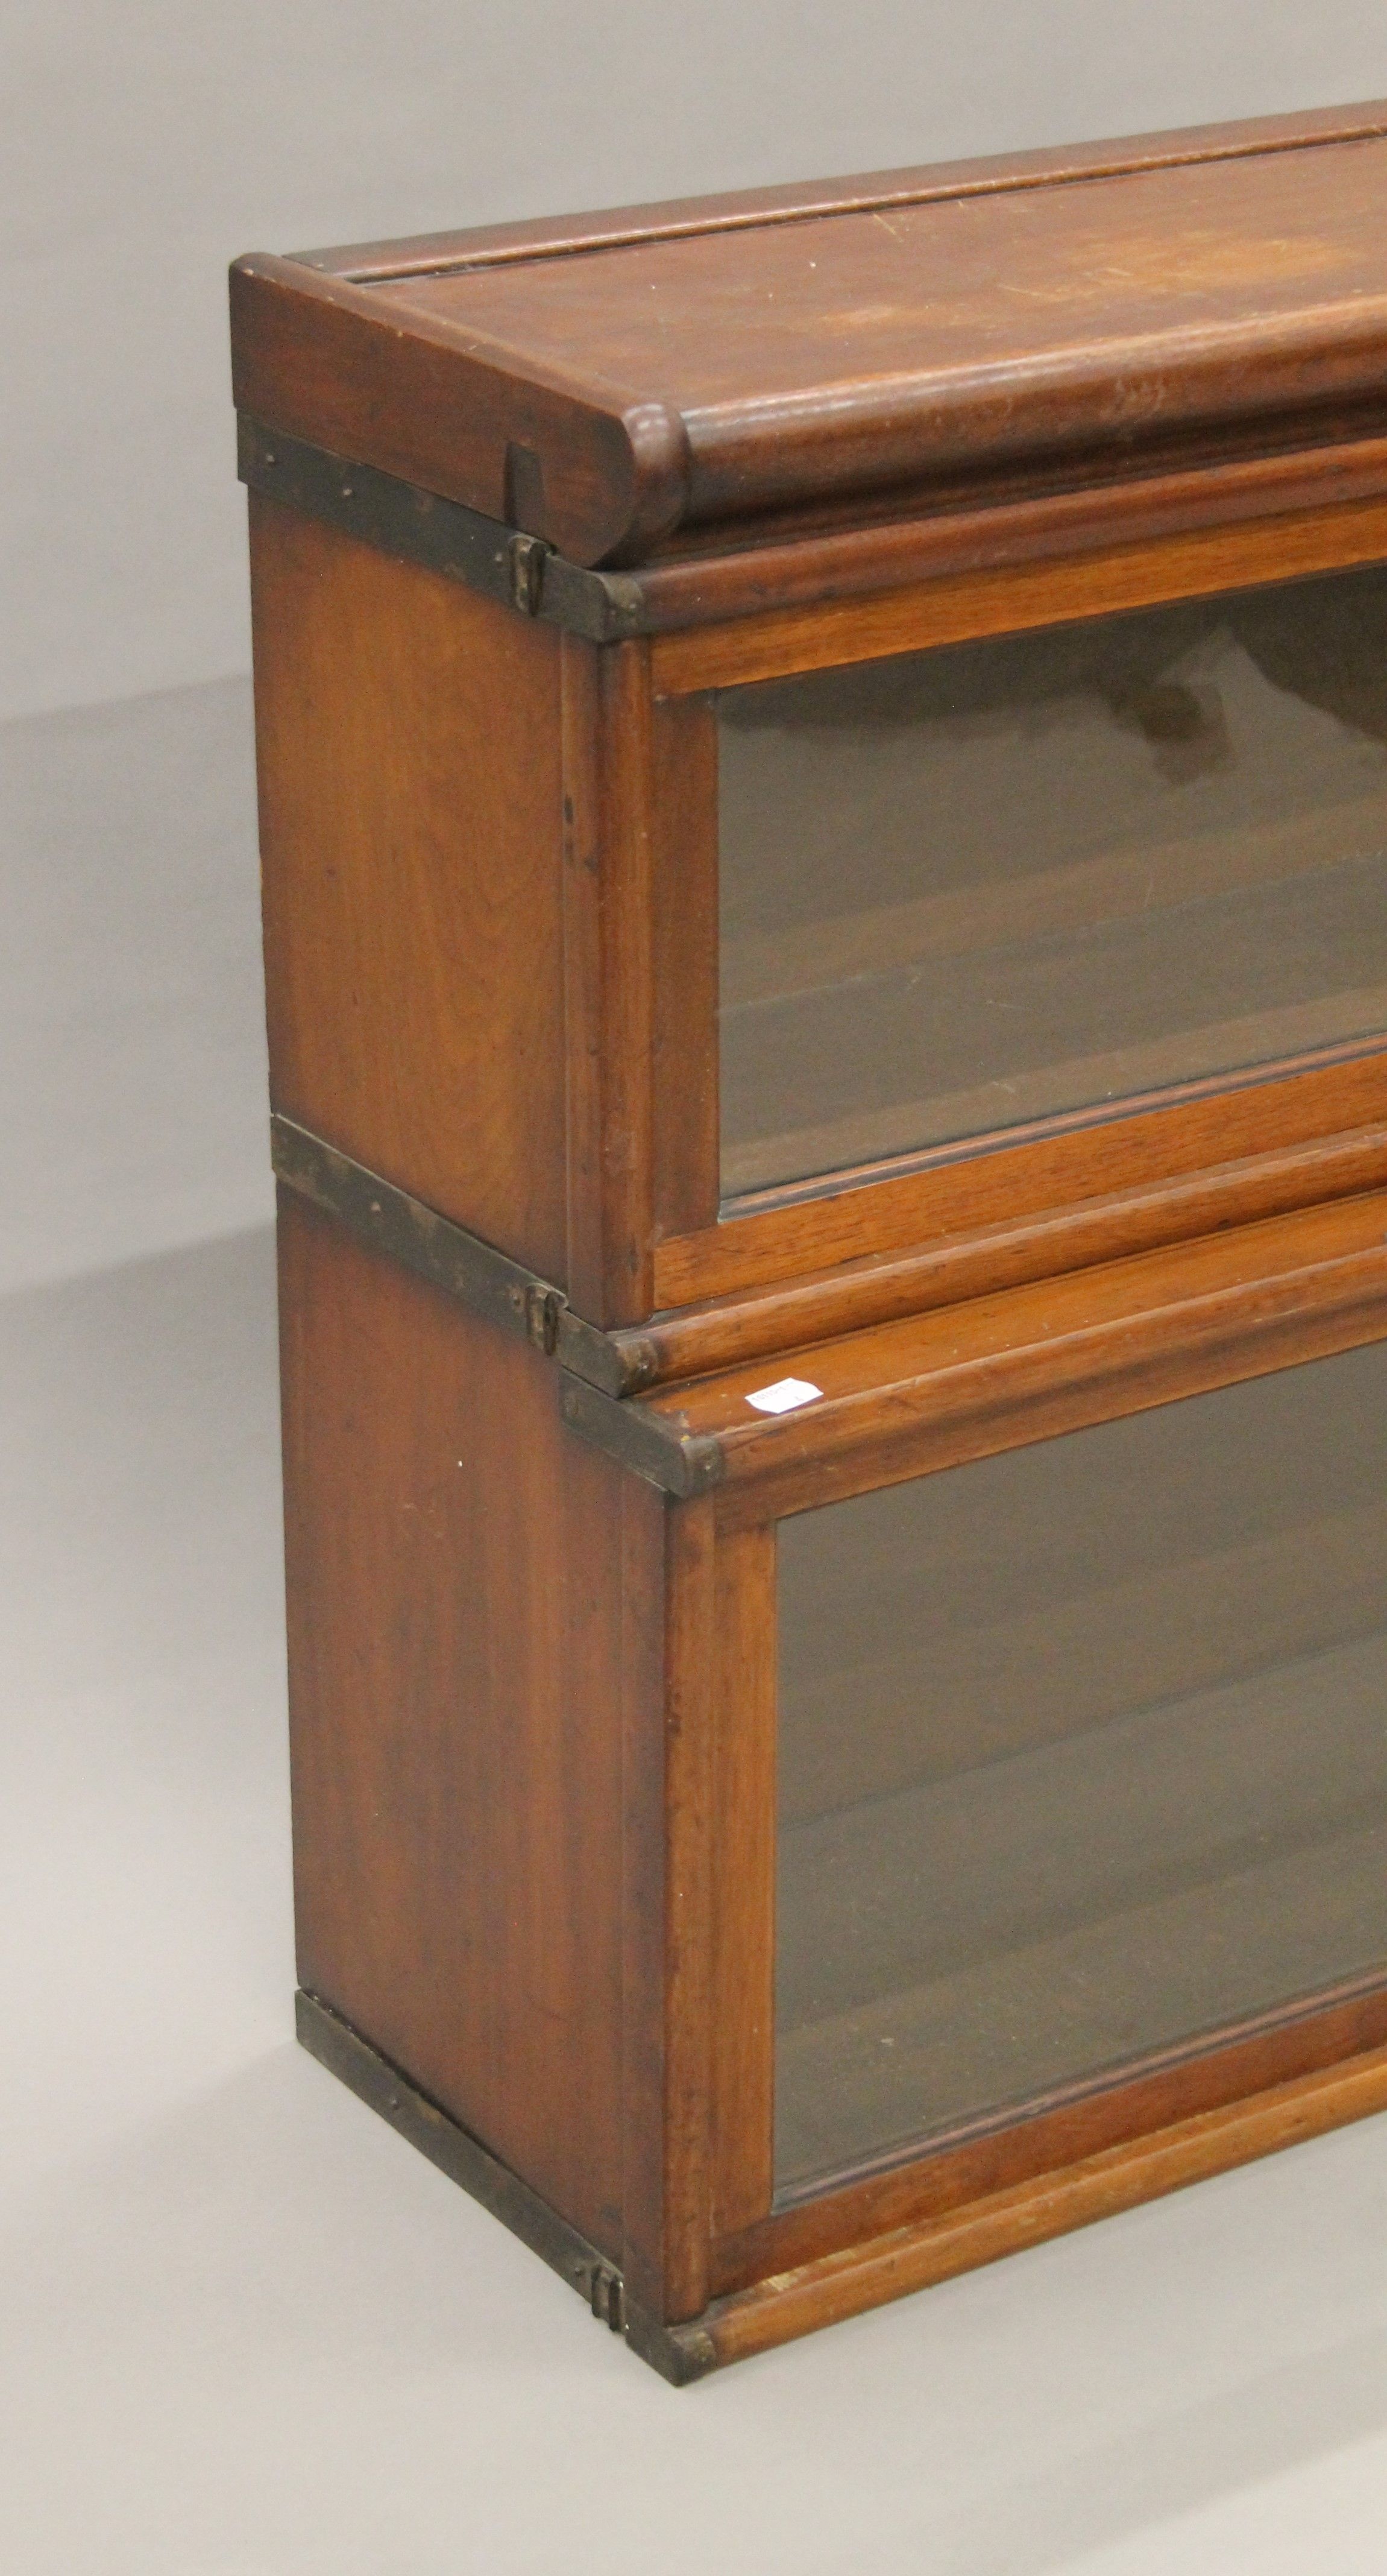 A two-stack mahogany Globe Wernicke bookcase. 86 cm wide, 73 cm high, 29 cm deep. - Image 3 of 7